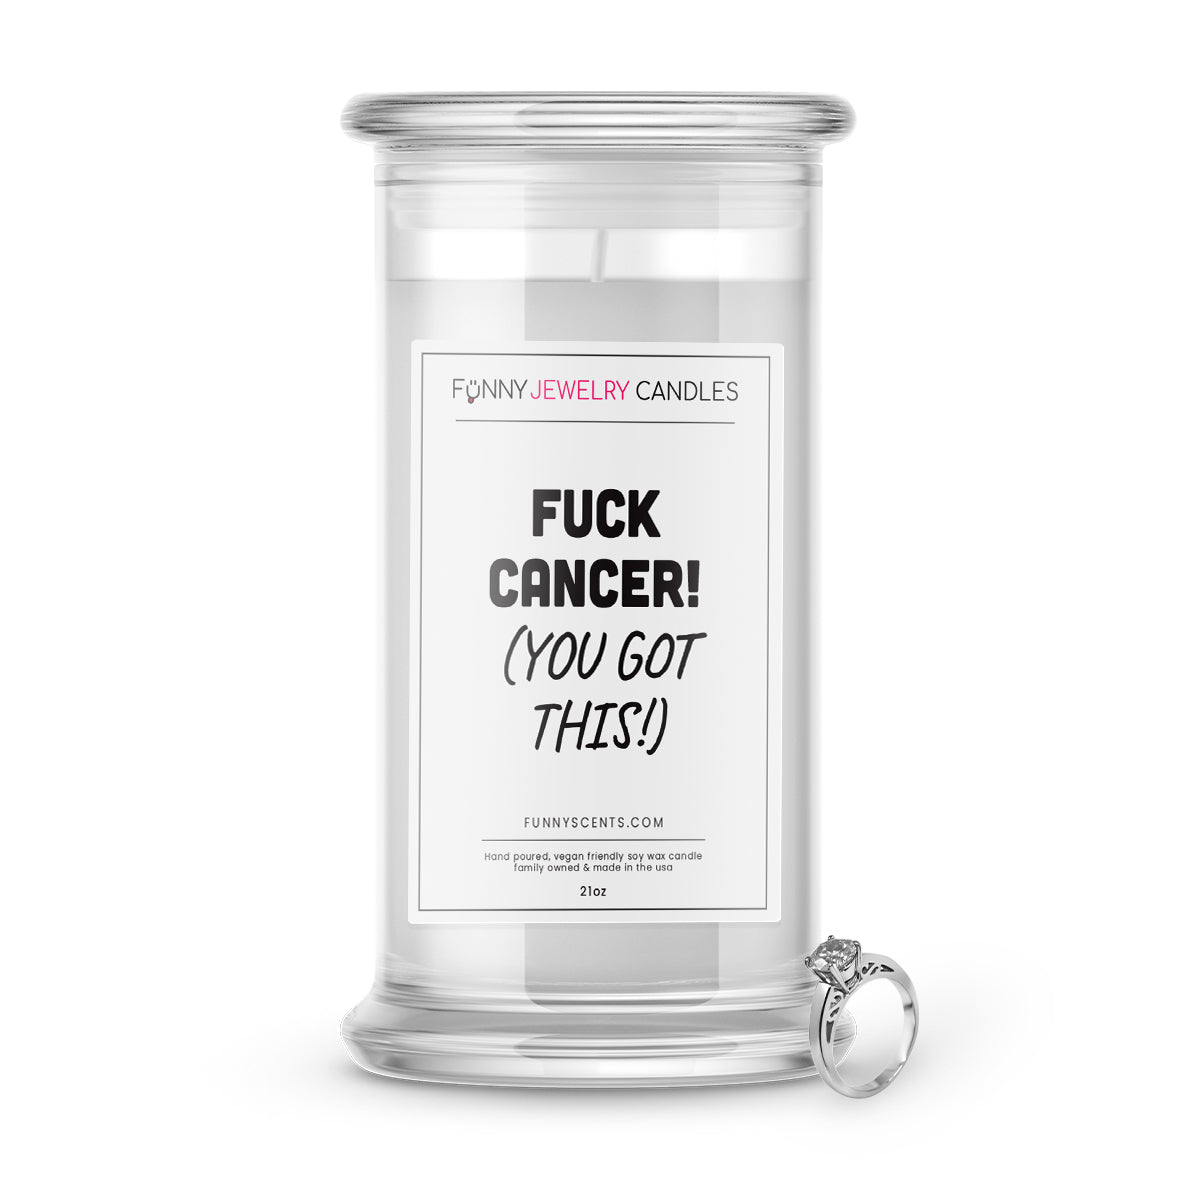 Fuck Cancer(You Got This!) Jewelry Funny Candles